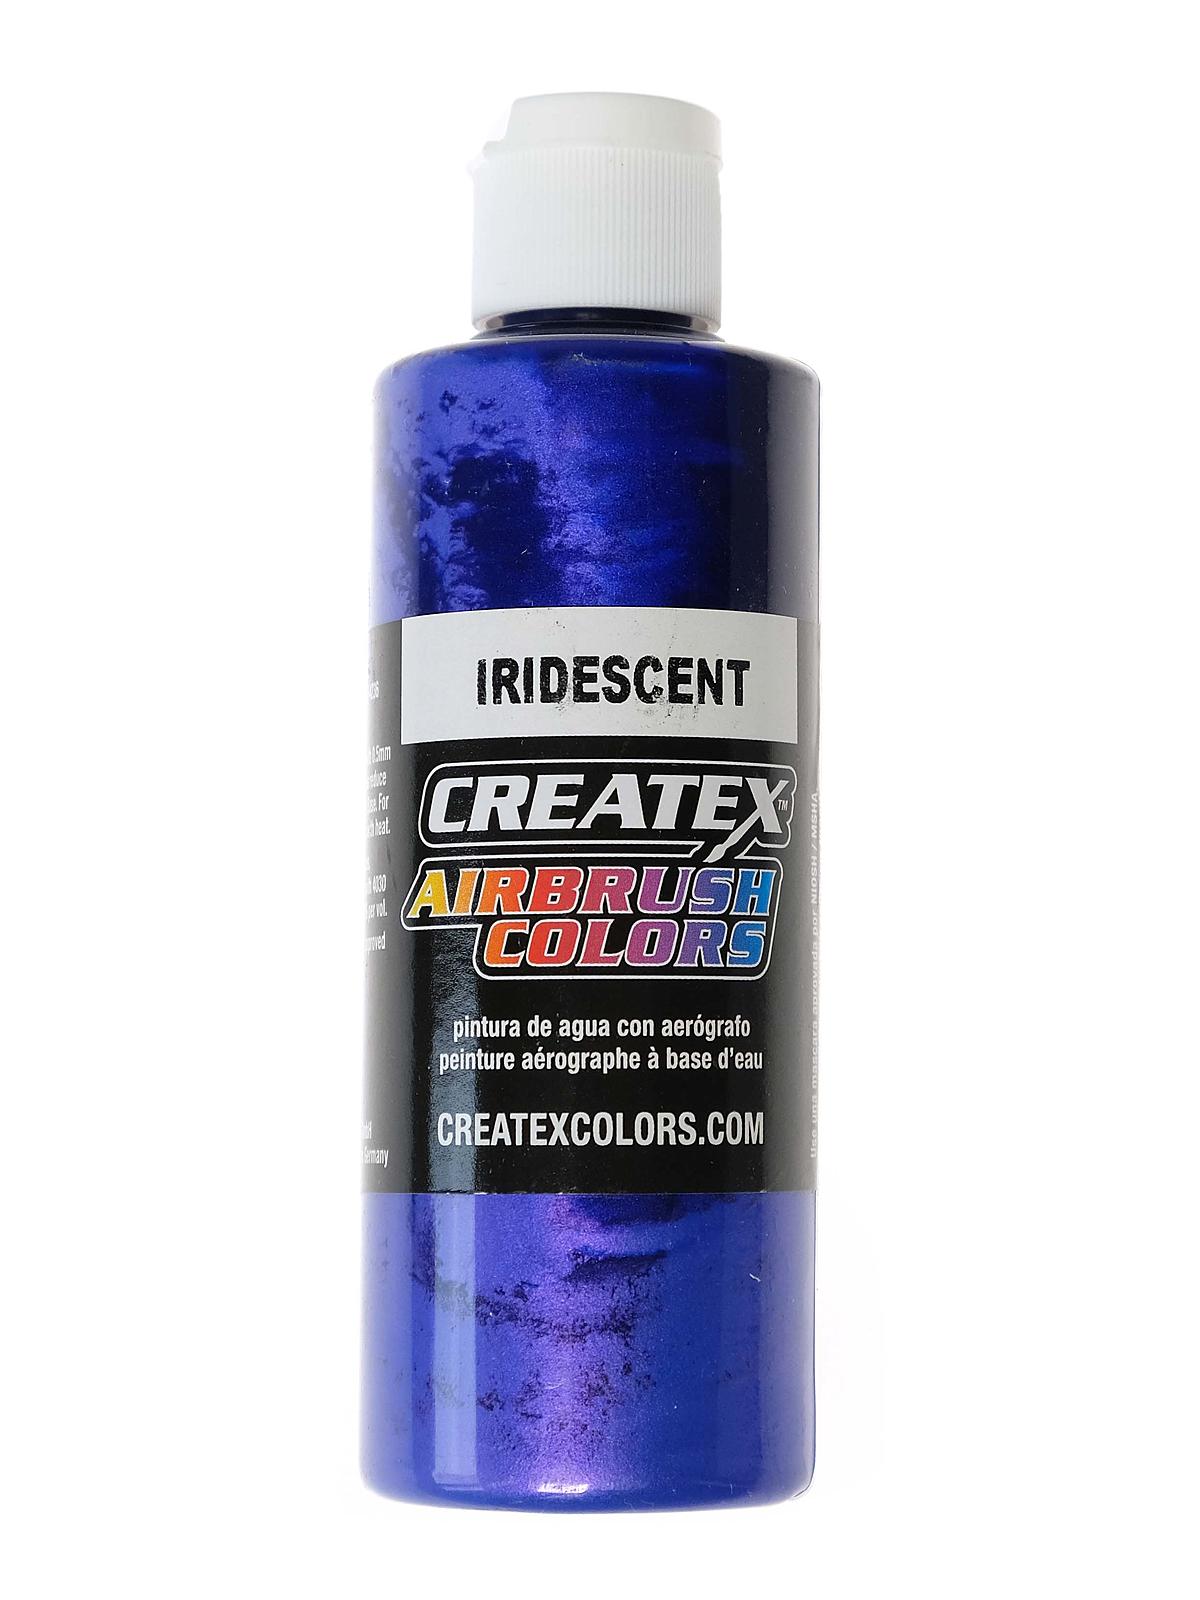 Airbrush Colors Iridescent Electric Blue 4 Oz.